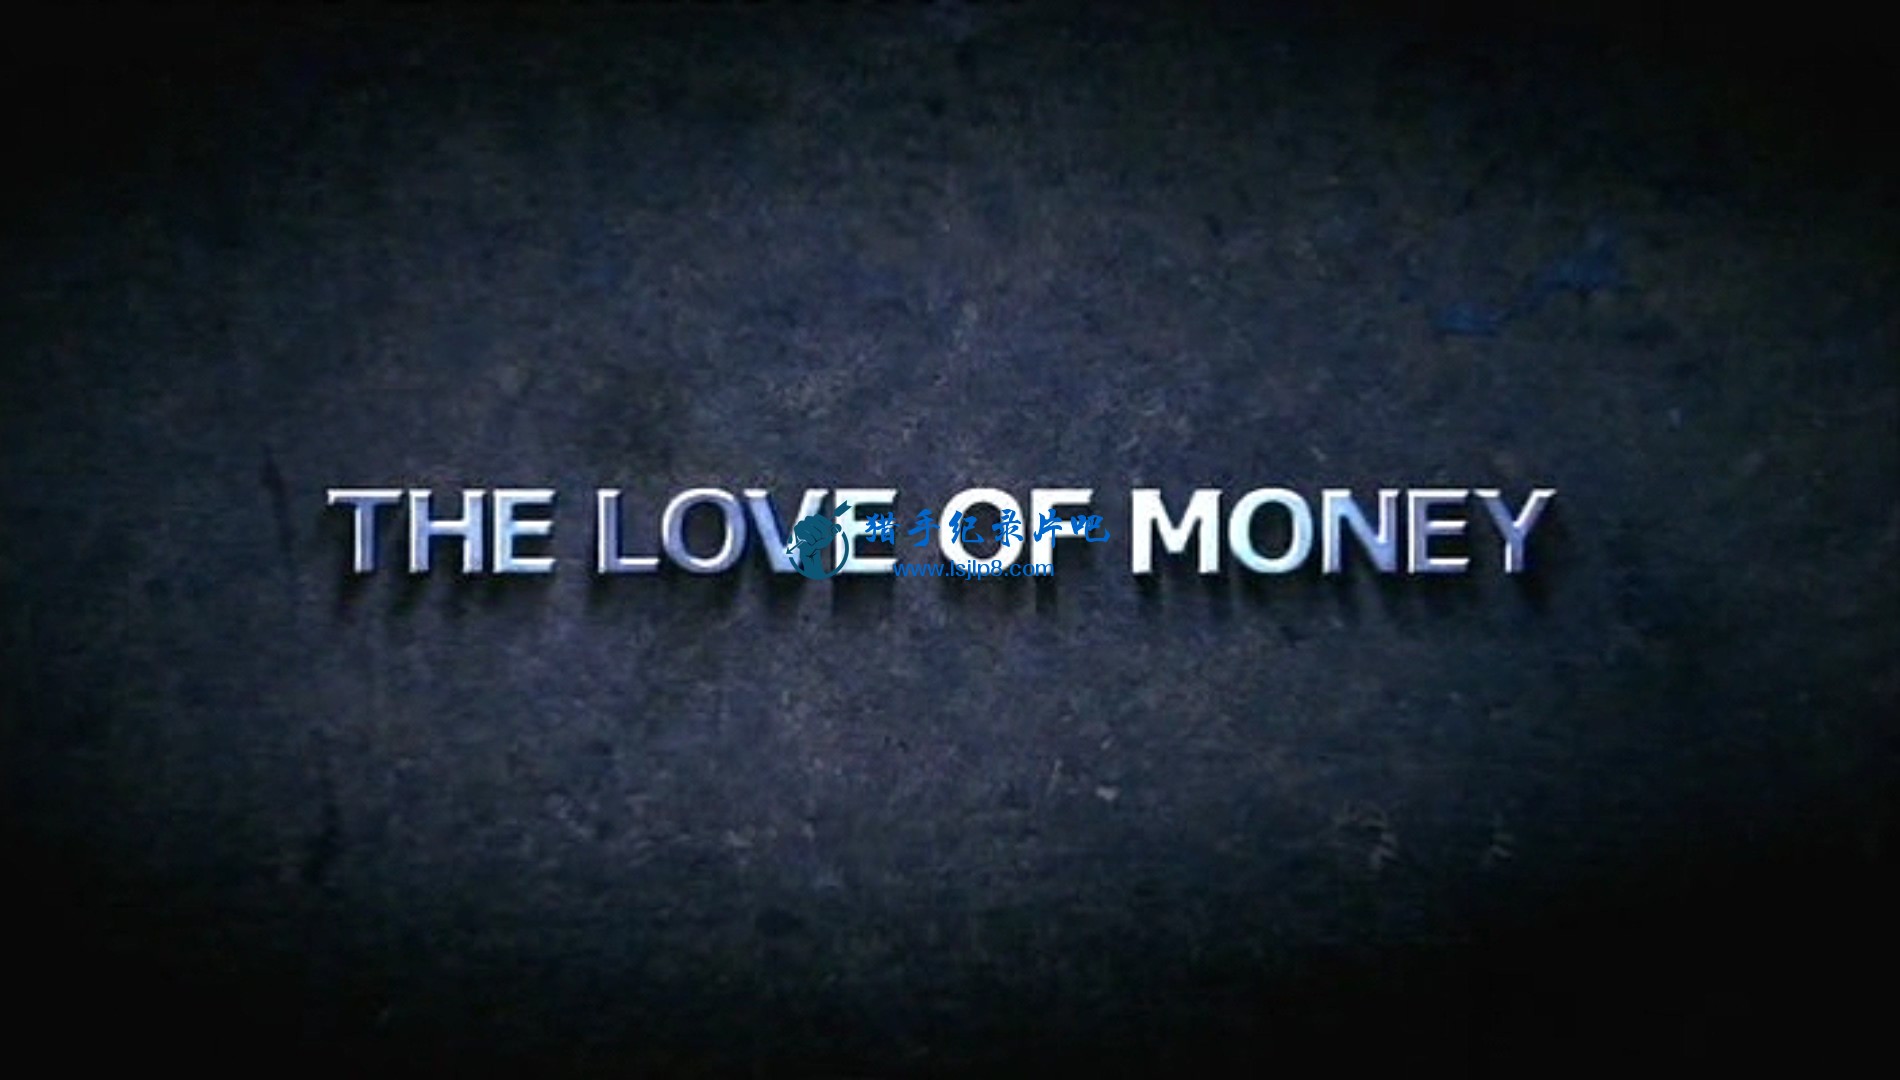 BBC.The.Love.of.Money.1of3.The.Bank.That.Bust.The.World.mkv_20210628_110715.753.jpg